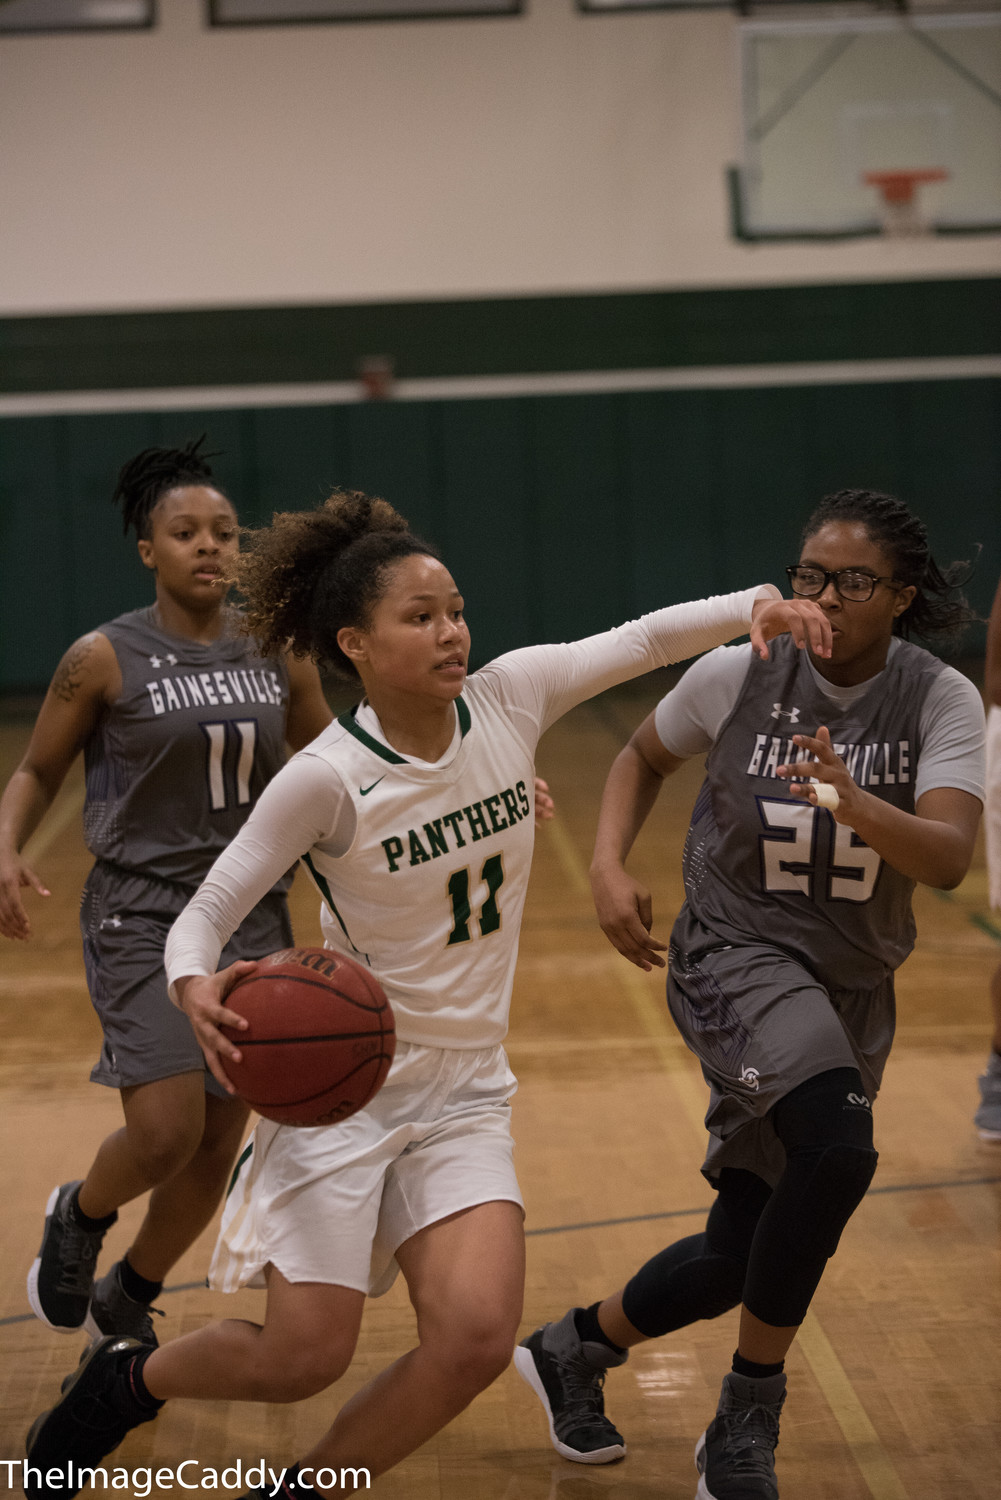 Nease’s Kiya Turner drives past Gainesville defenders during the Region 1-7A semifinals. Turner had 15 points in the game.